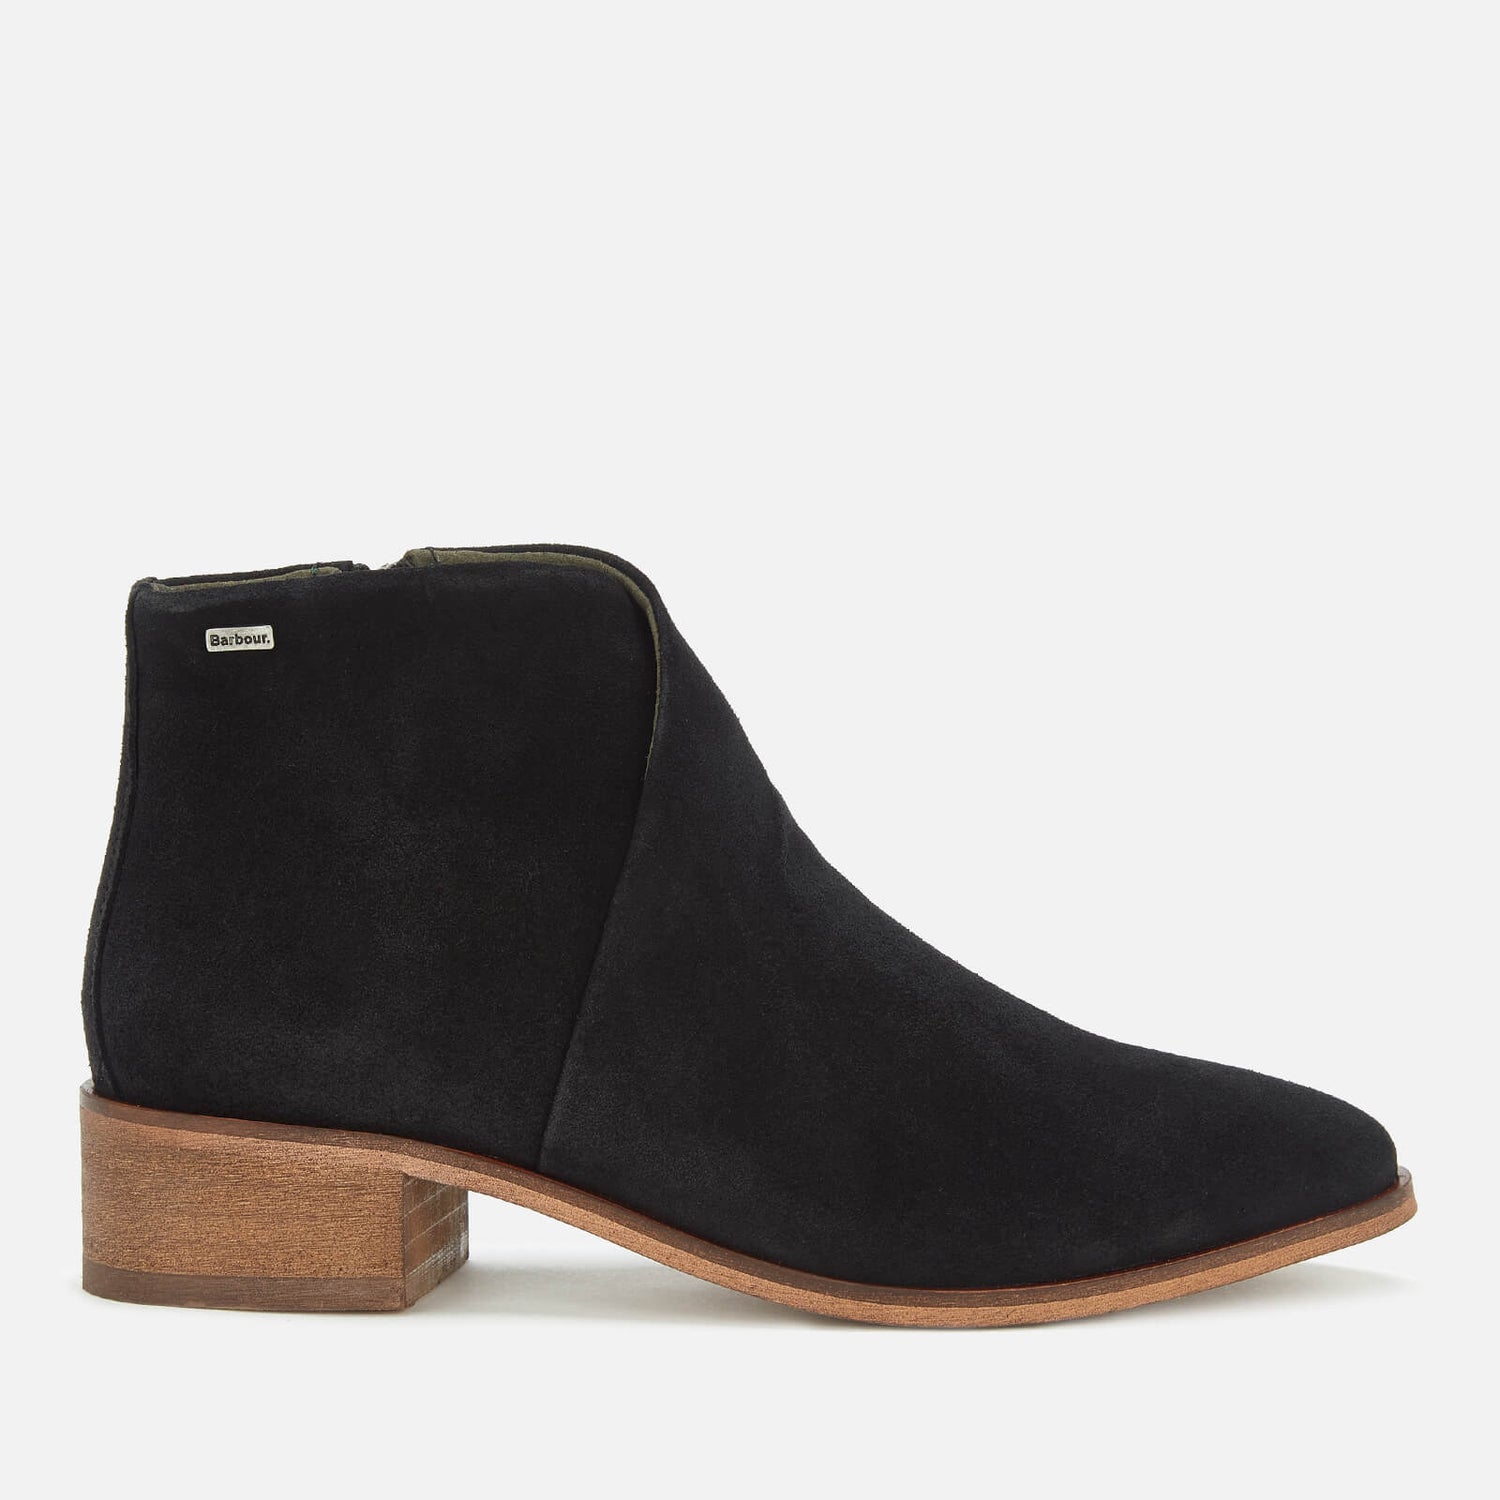 Barbour Women's Caryn Suede Heeled Ankle Boots - Black